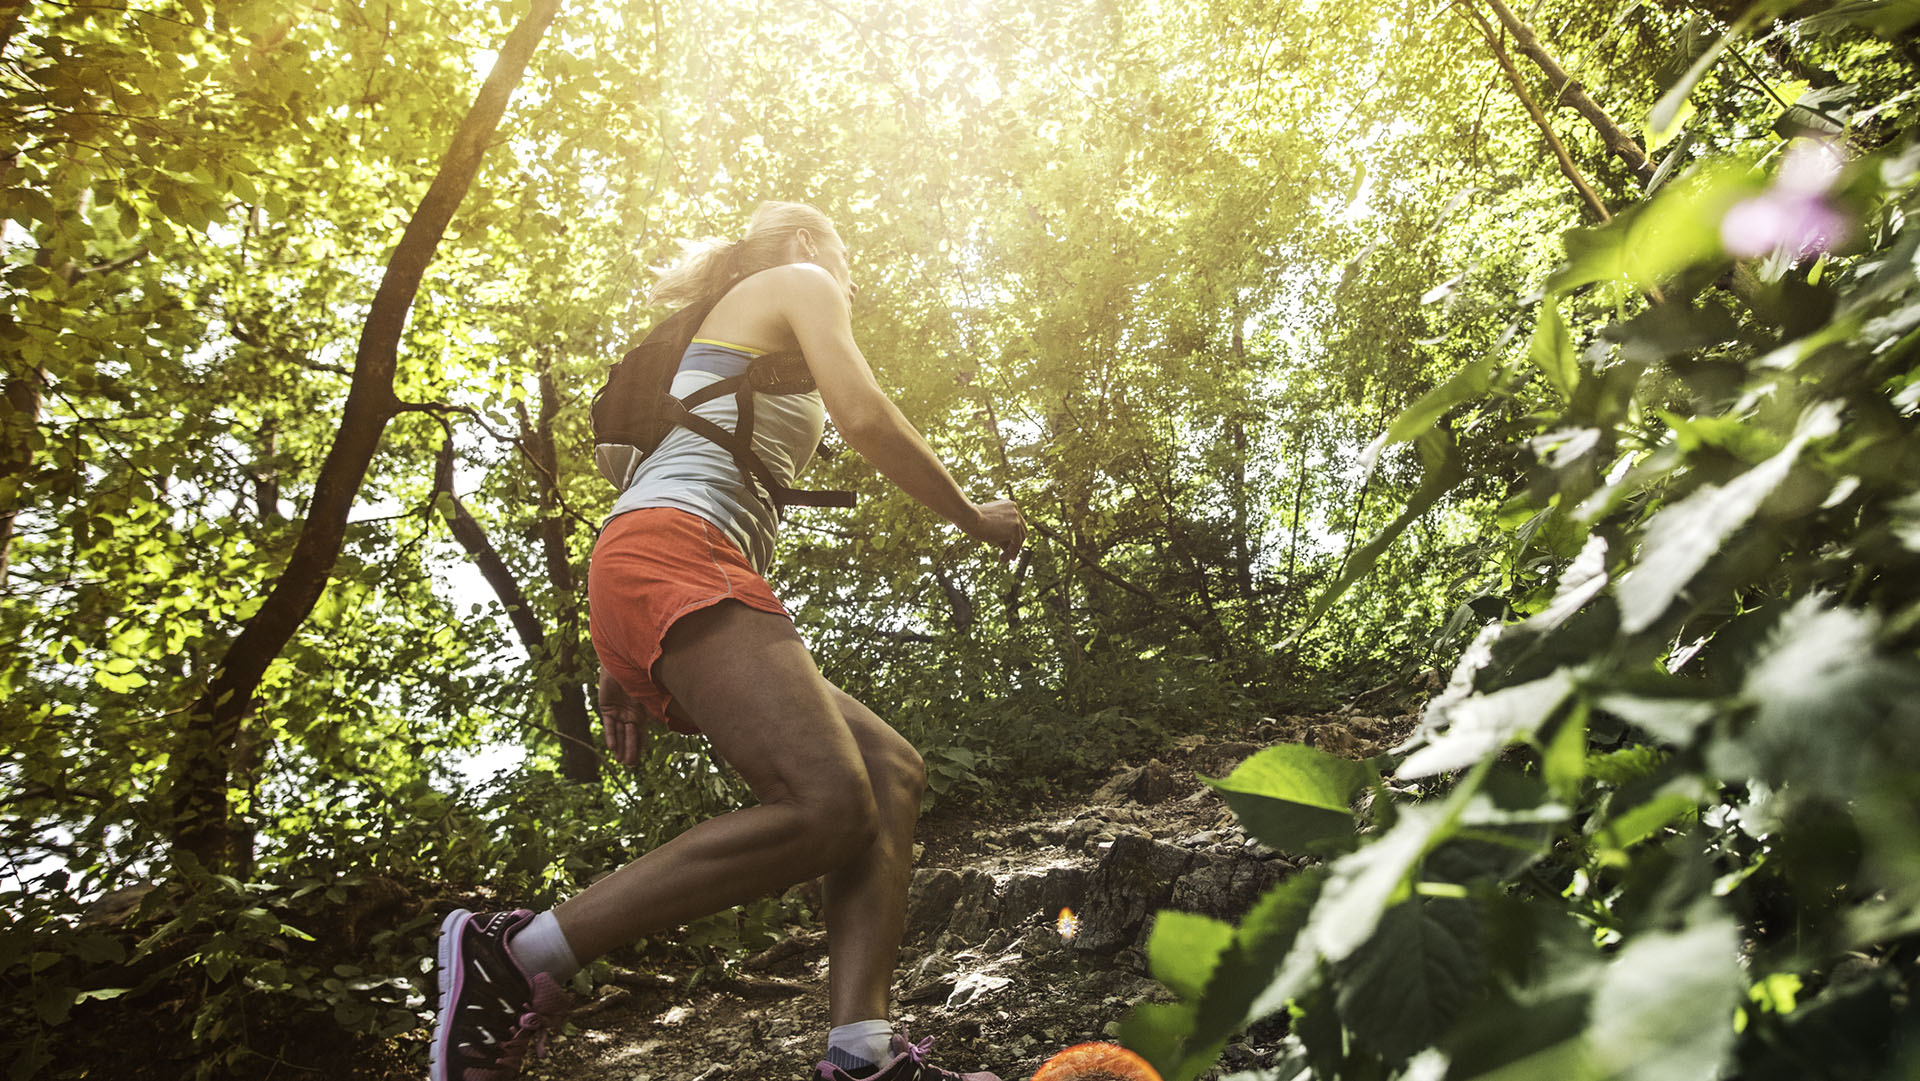 Female runner going uphill on a rocky forest path.